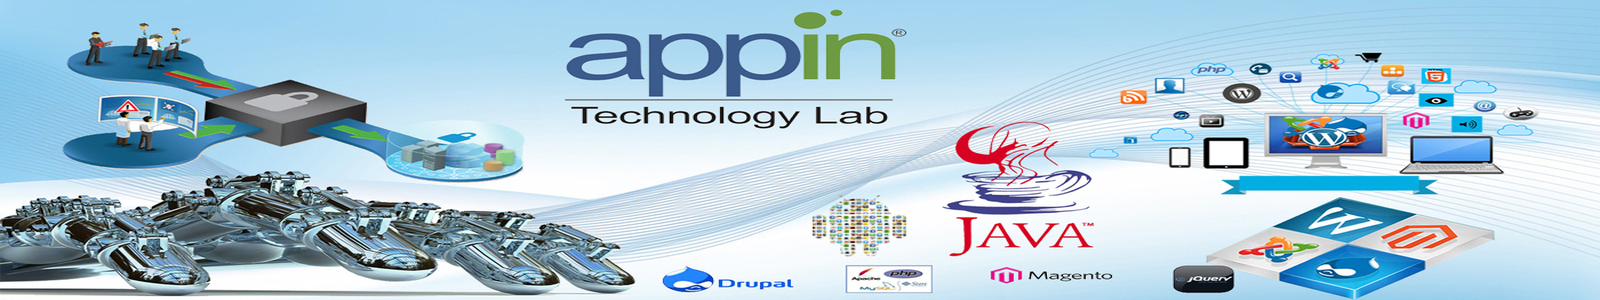 Appin Technology